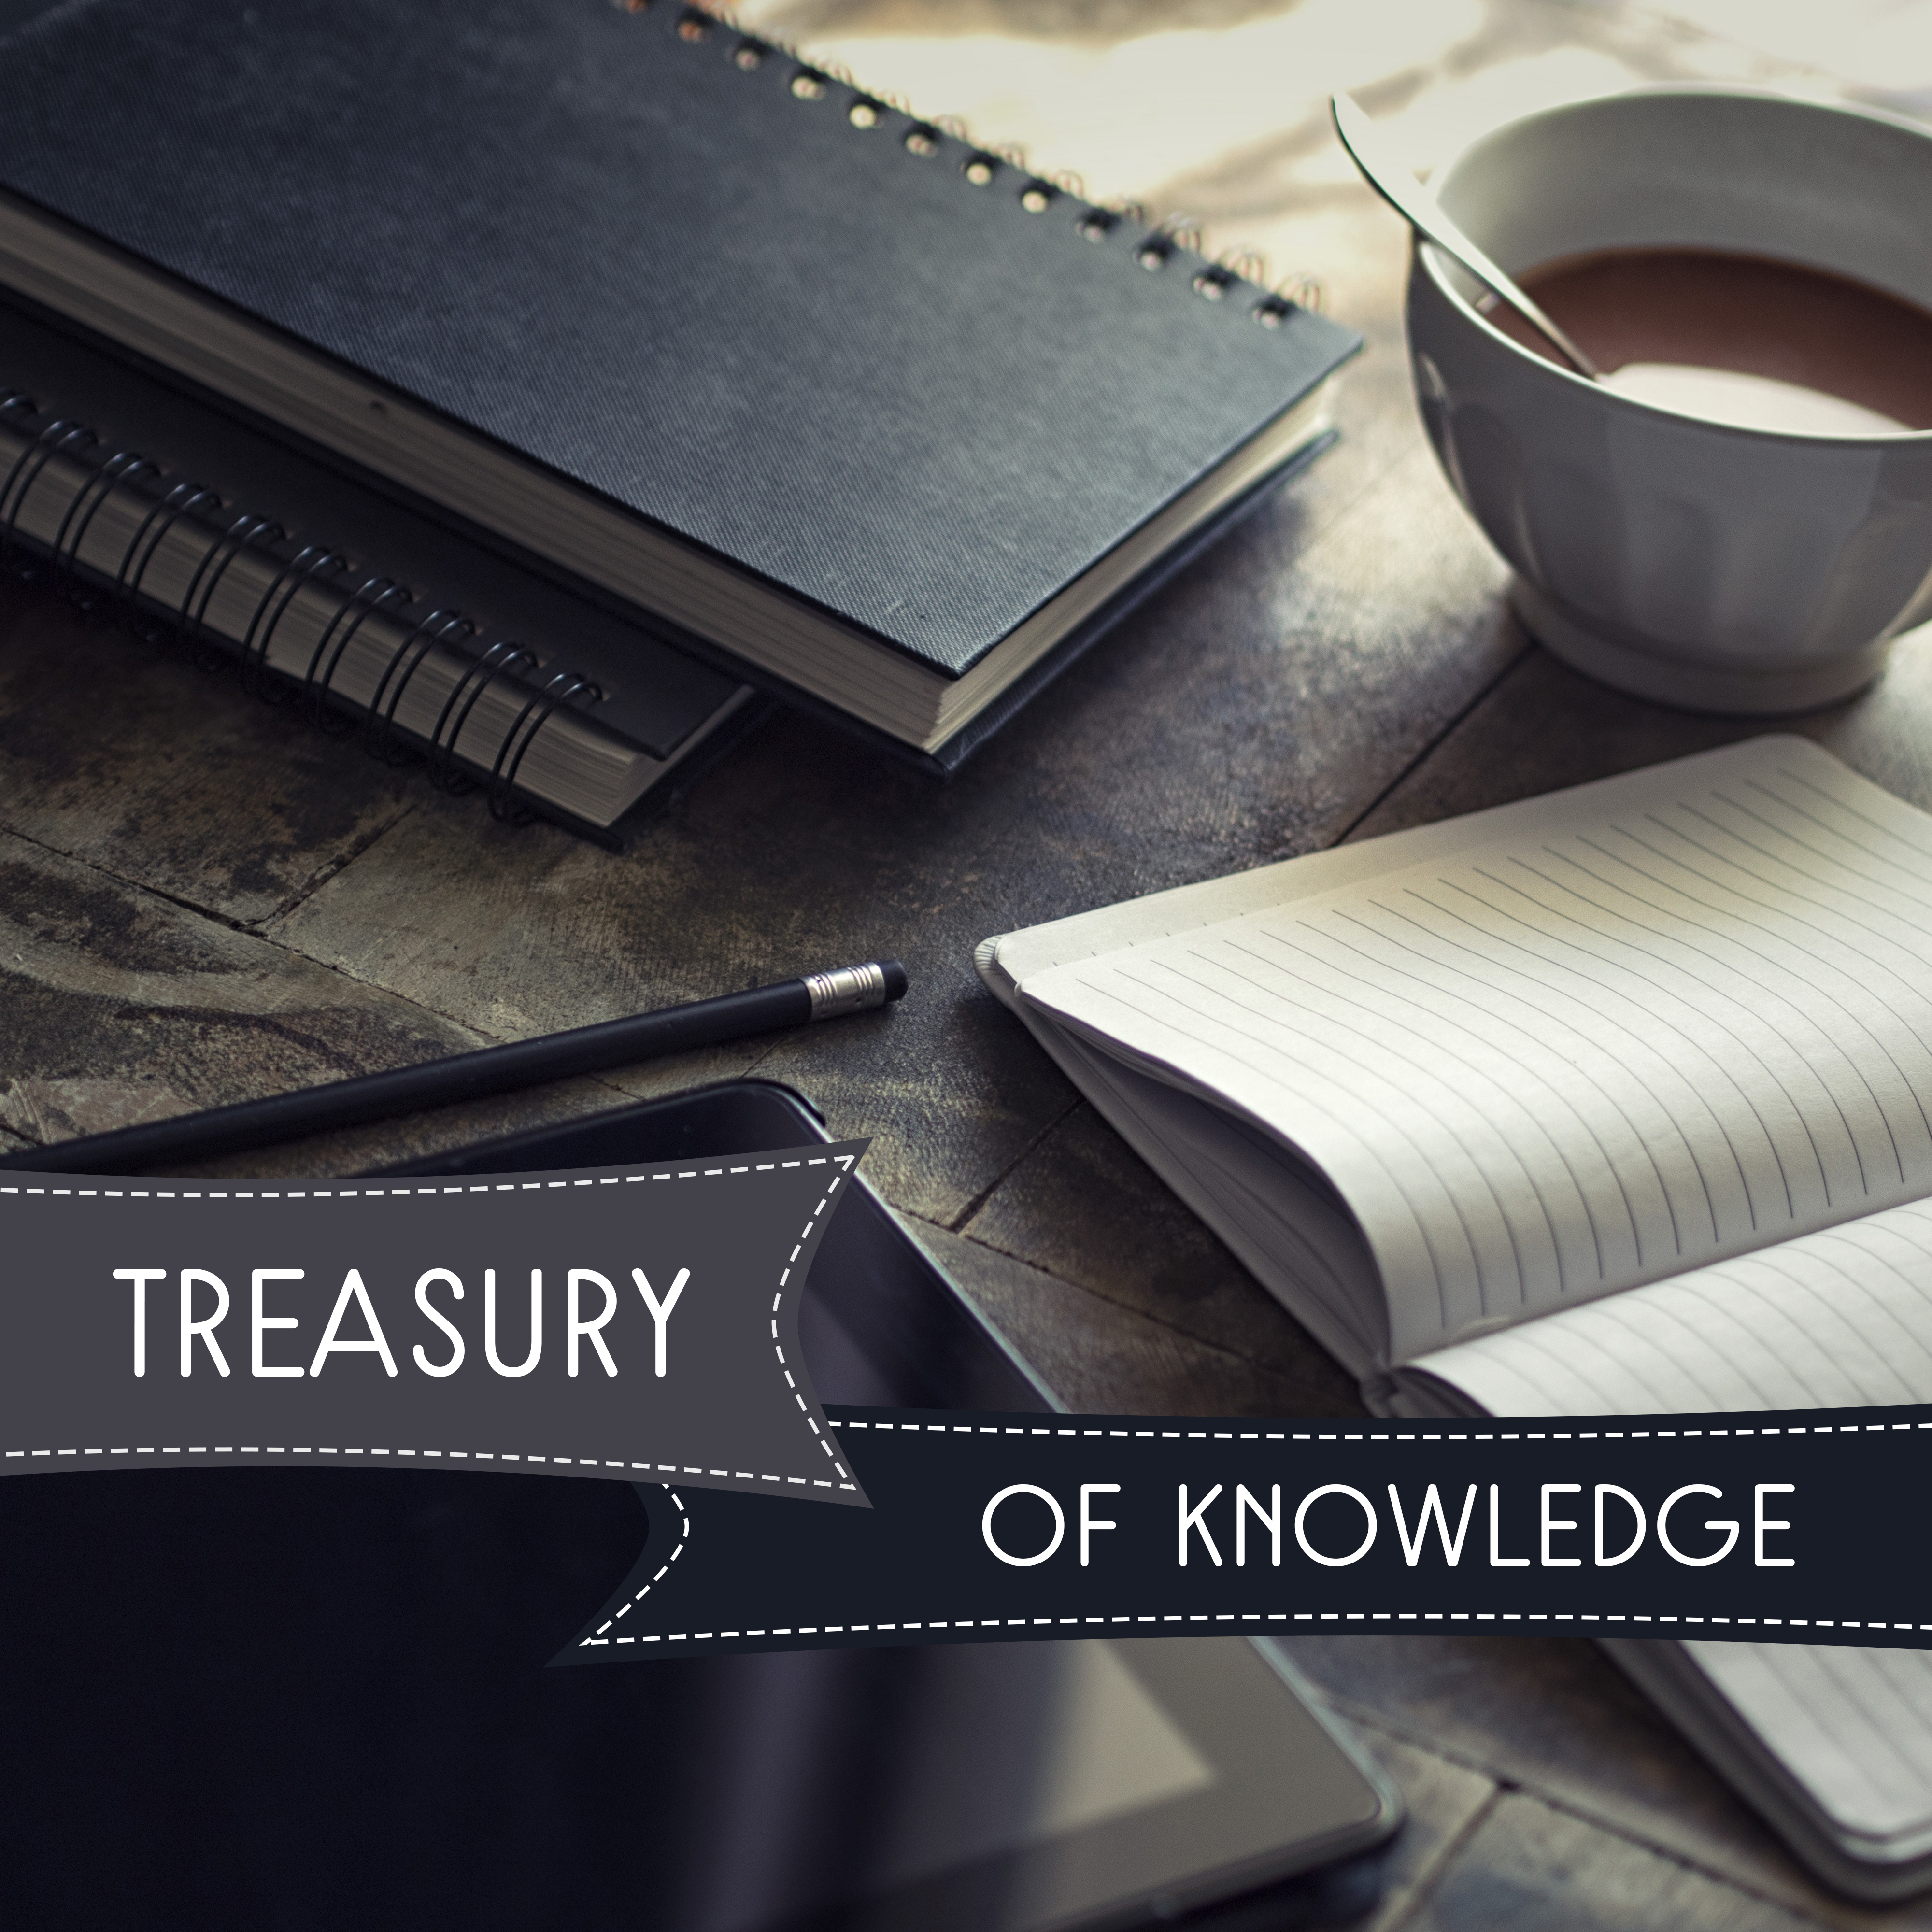 Treasury of Knowledge  Music for Study, Instrumental Sounds Improve Memory, Deep Focus, Beethoven for Learning